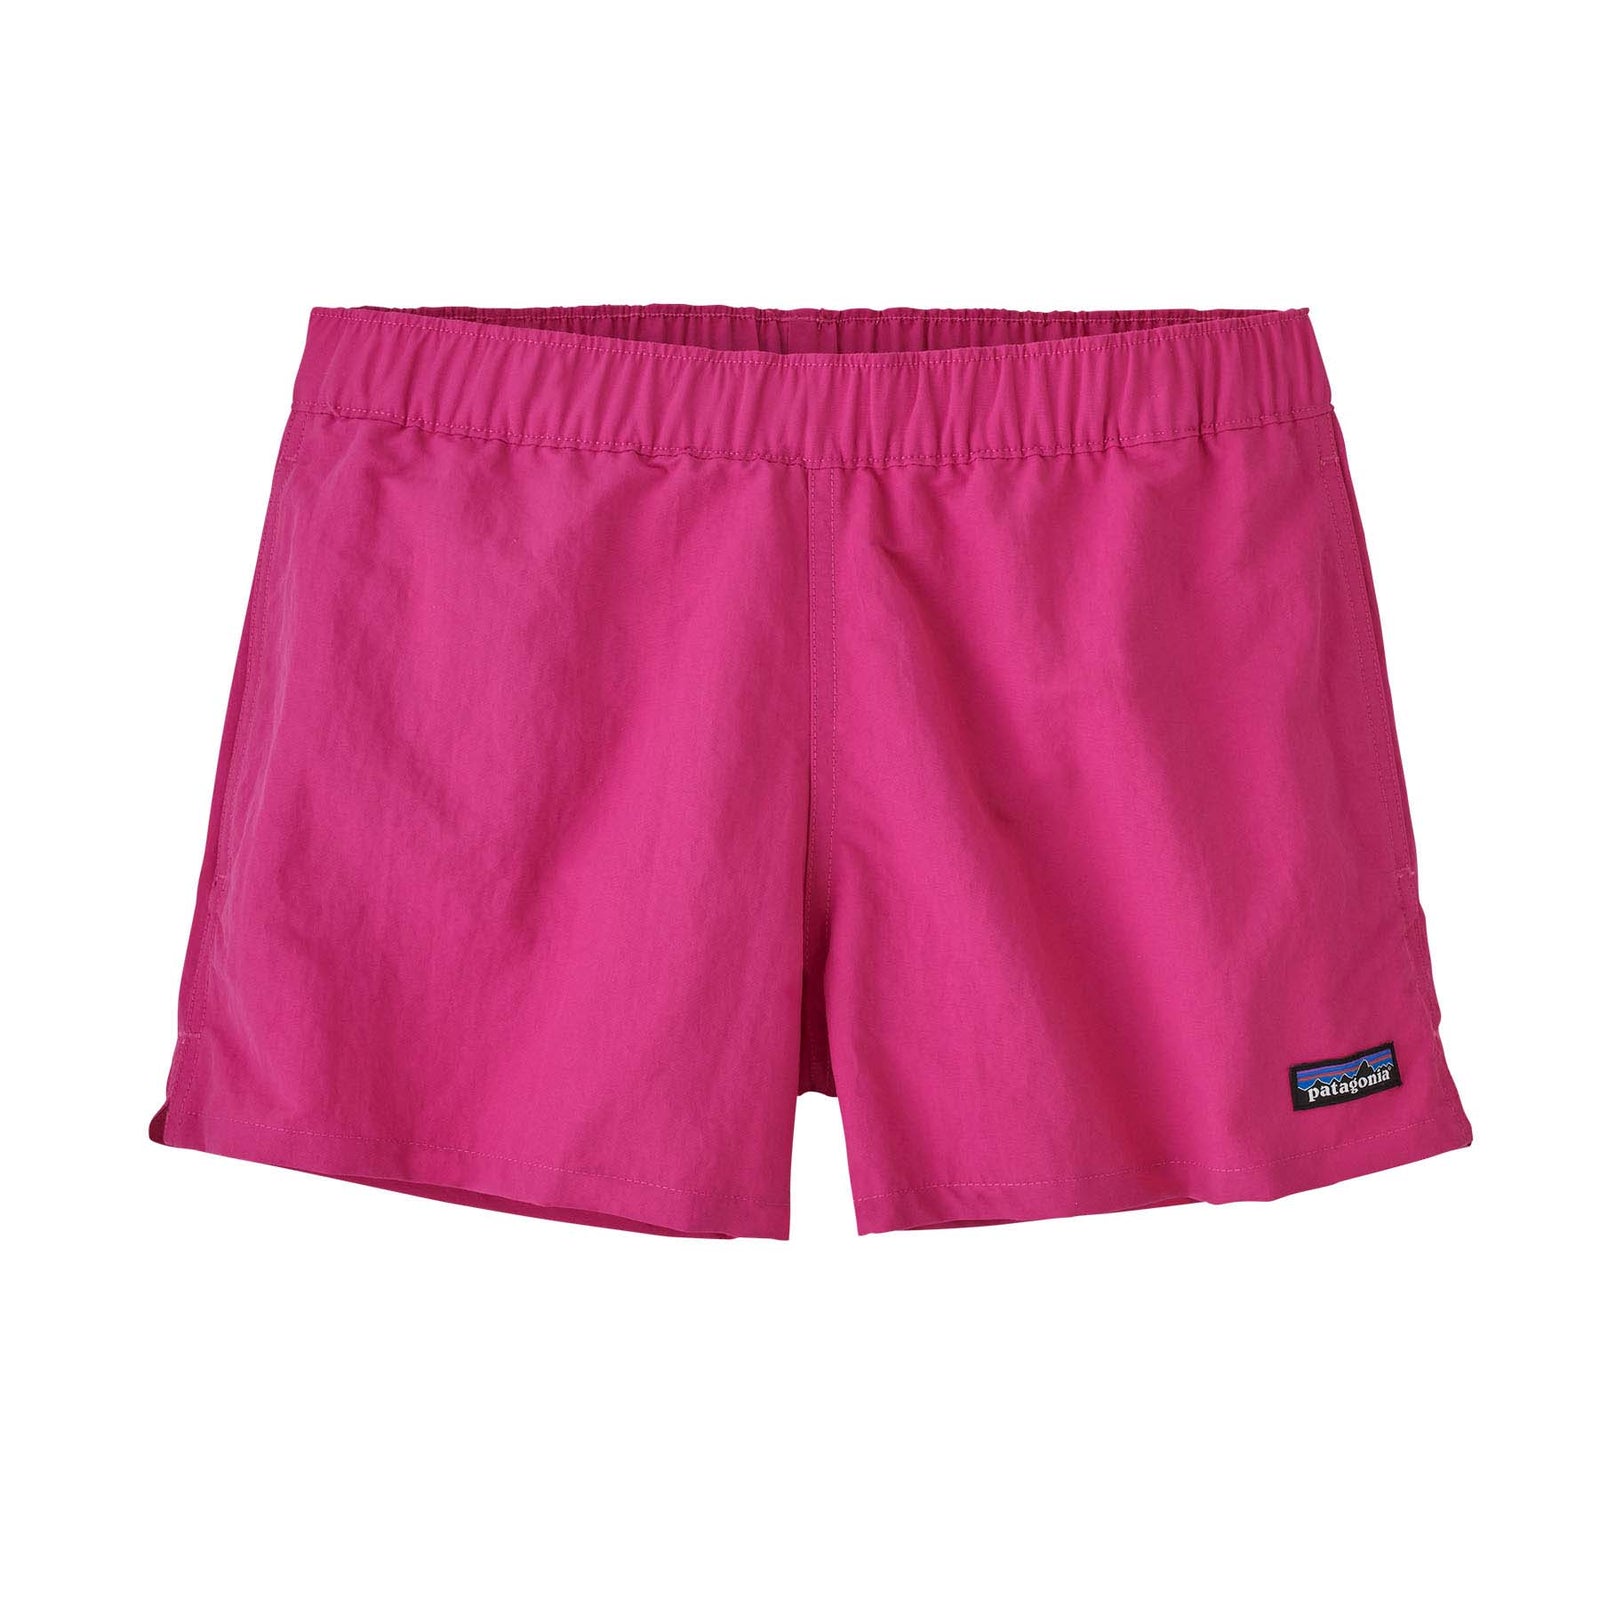 Patagonia Women's Barely Baggies Shorts - 2 1/2 in 2023 MYPK MYTHIC PIN